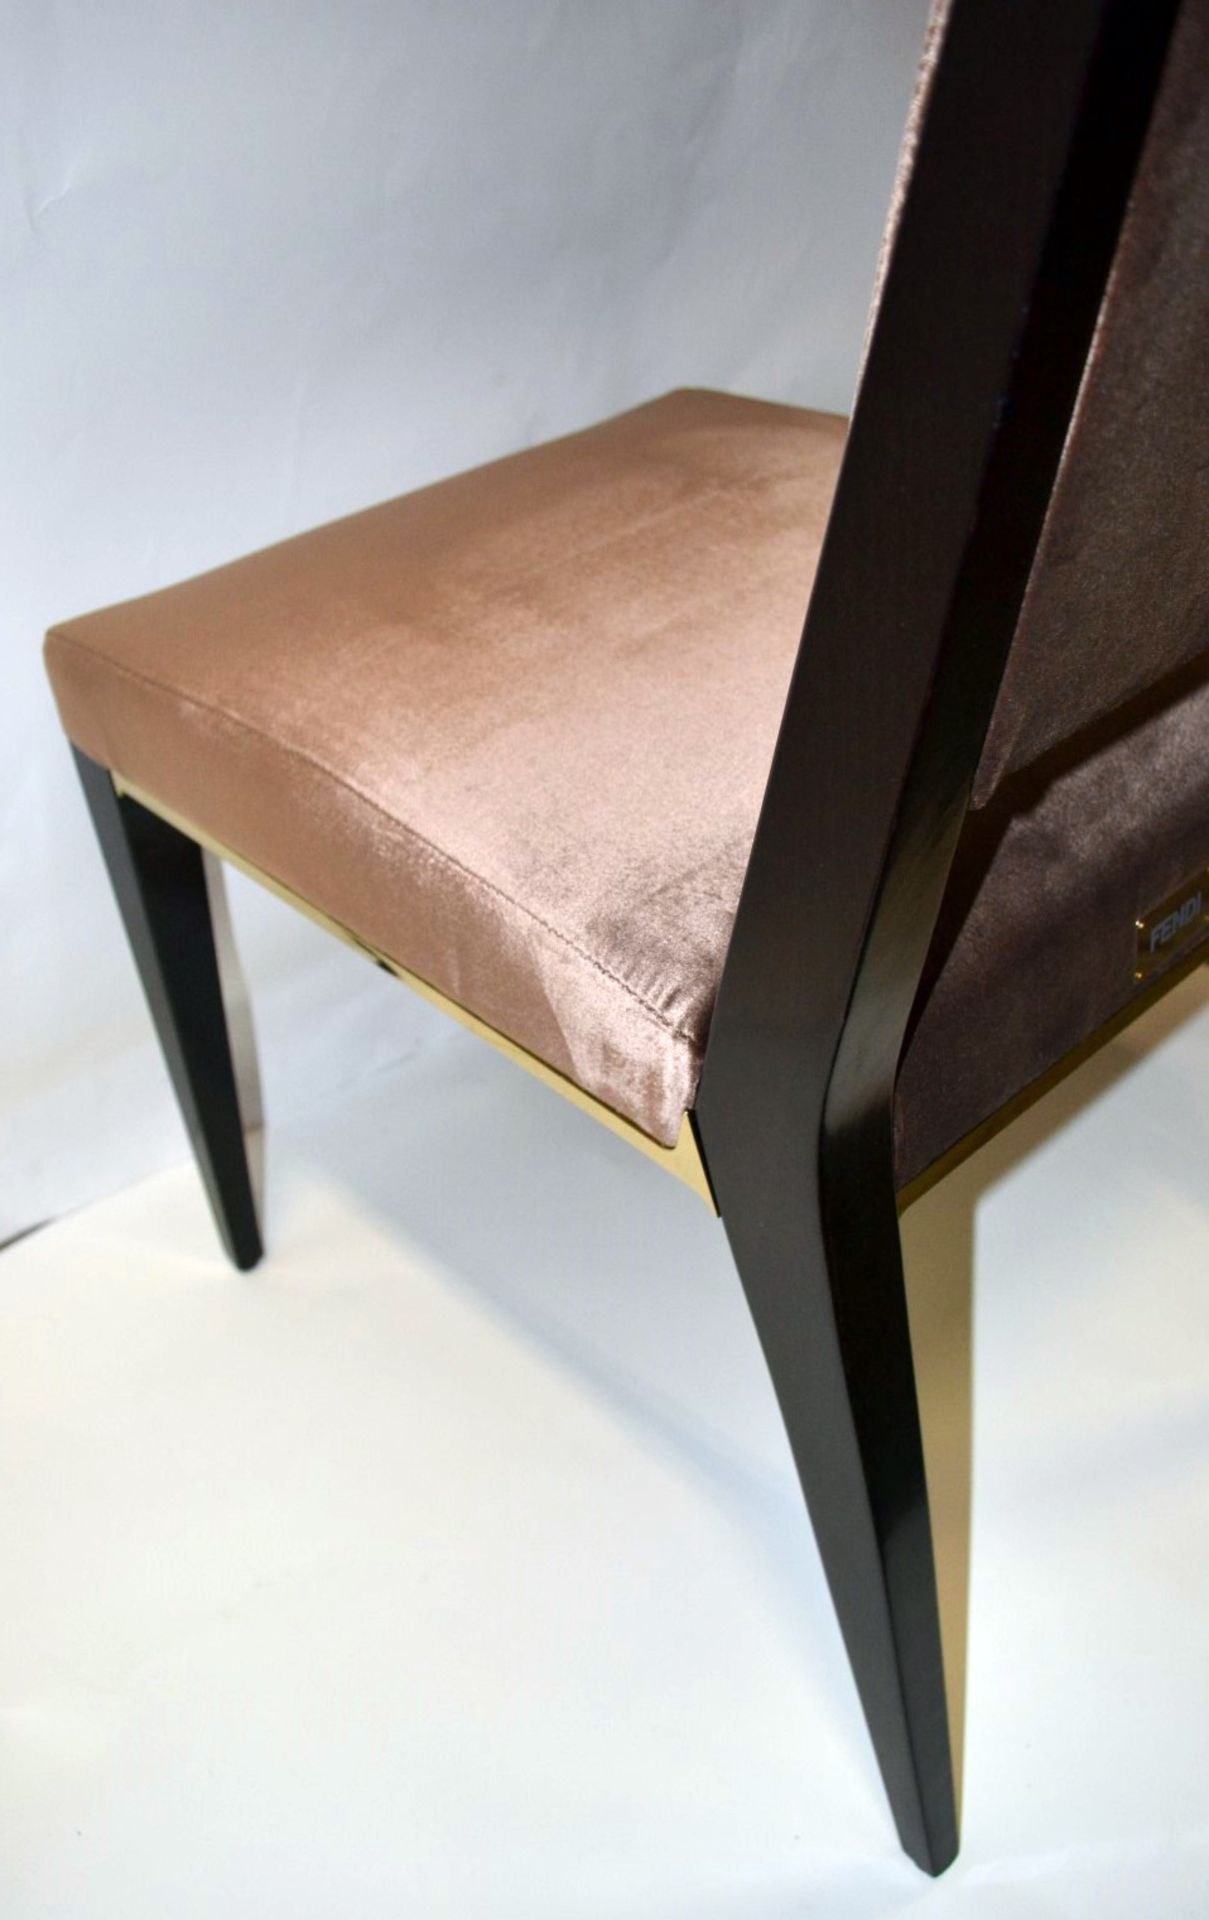 6 x FENDI Stardust Chairs (Art. Ss14/2) - Upholstered In A Rich Mocha Chenille With Brass - Image 5 of 7